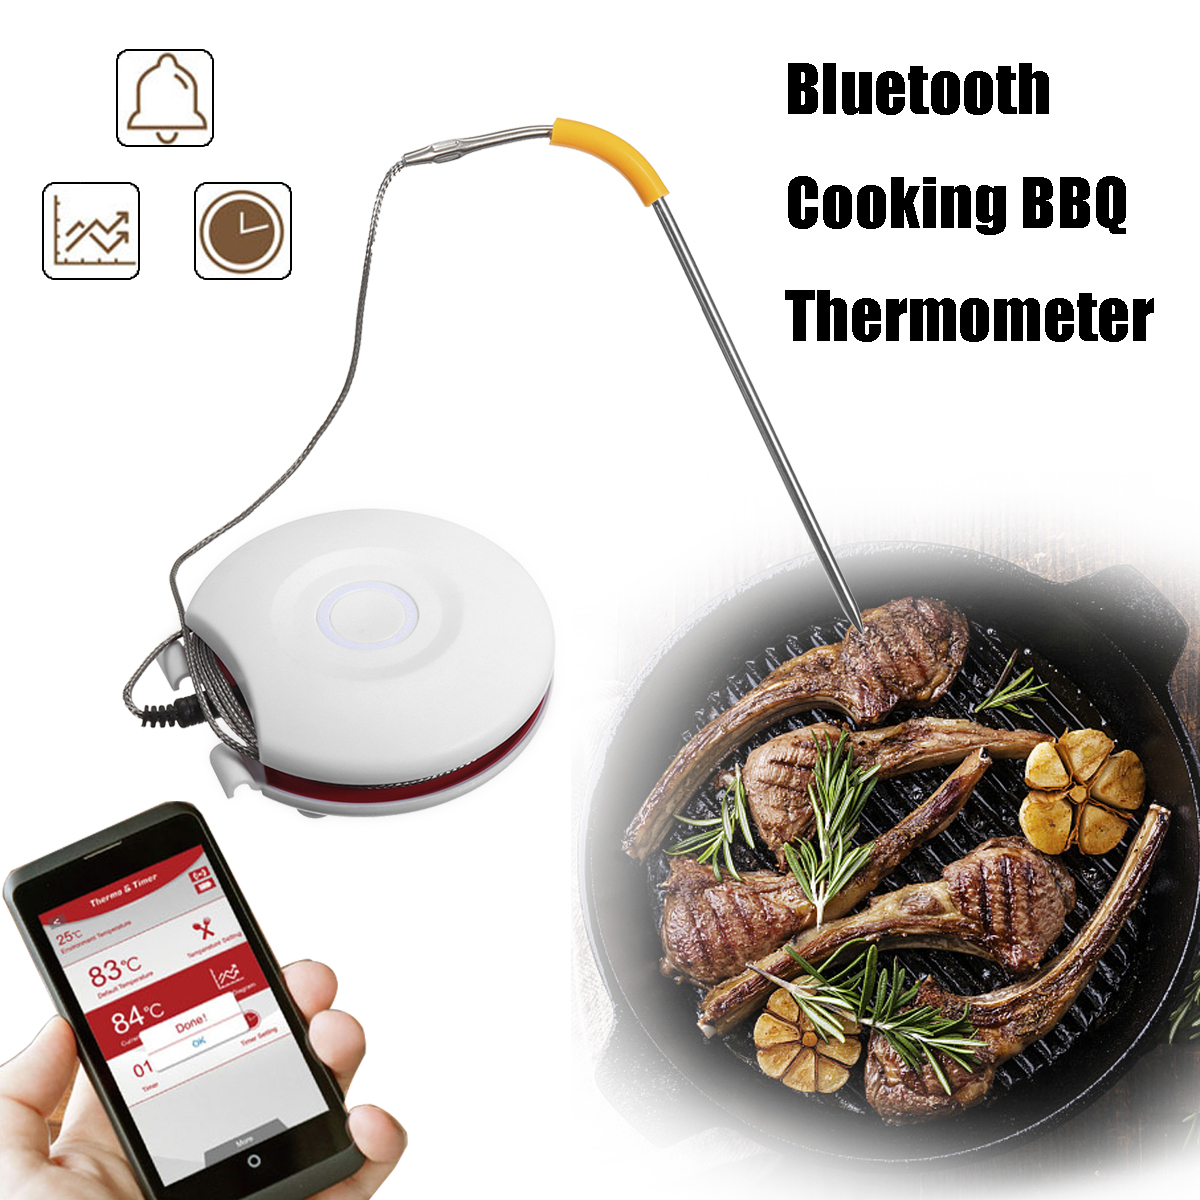 Digital-Cooking-Meat-Thermometer-bluetooth-Wireless-BBQ-Sensor-Smoke-for-Kitchen-1299055-2